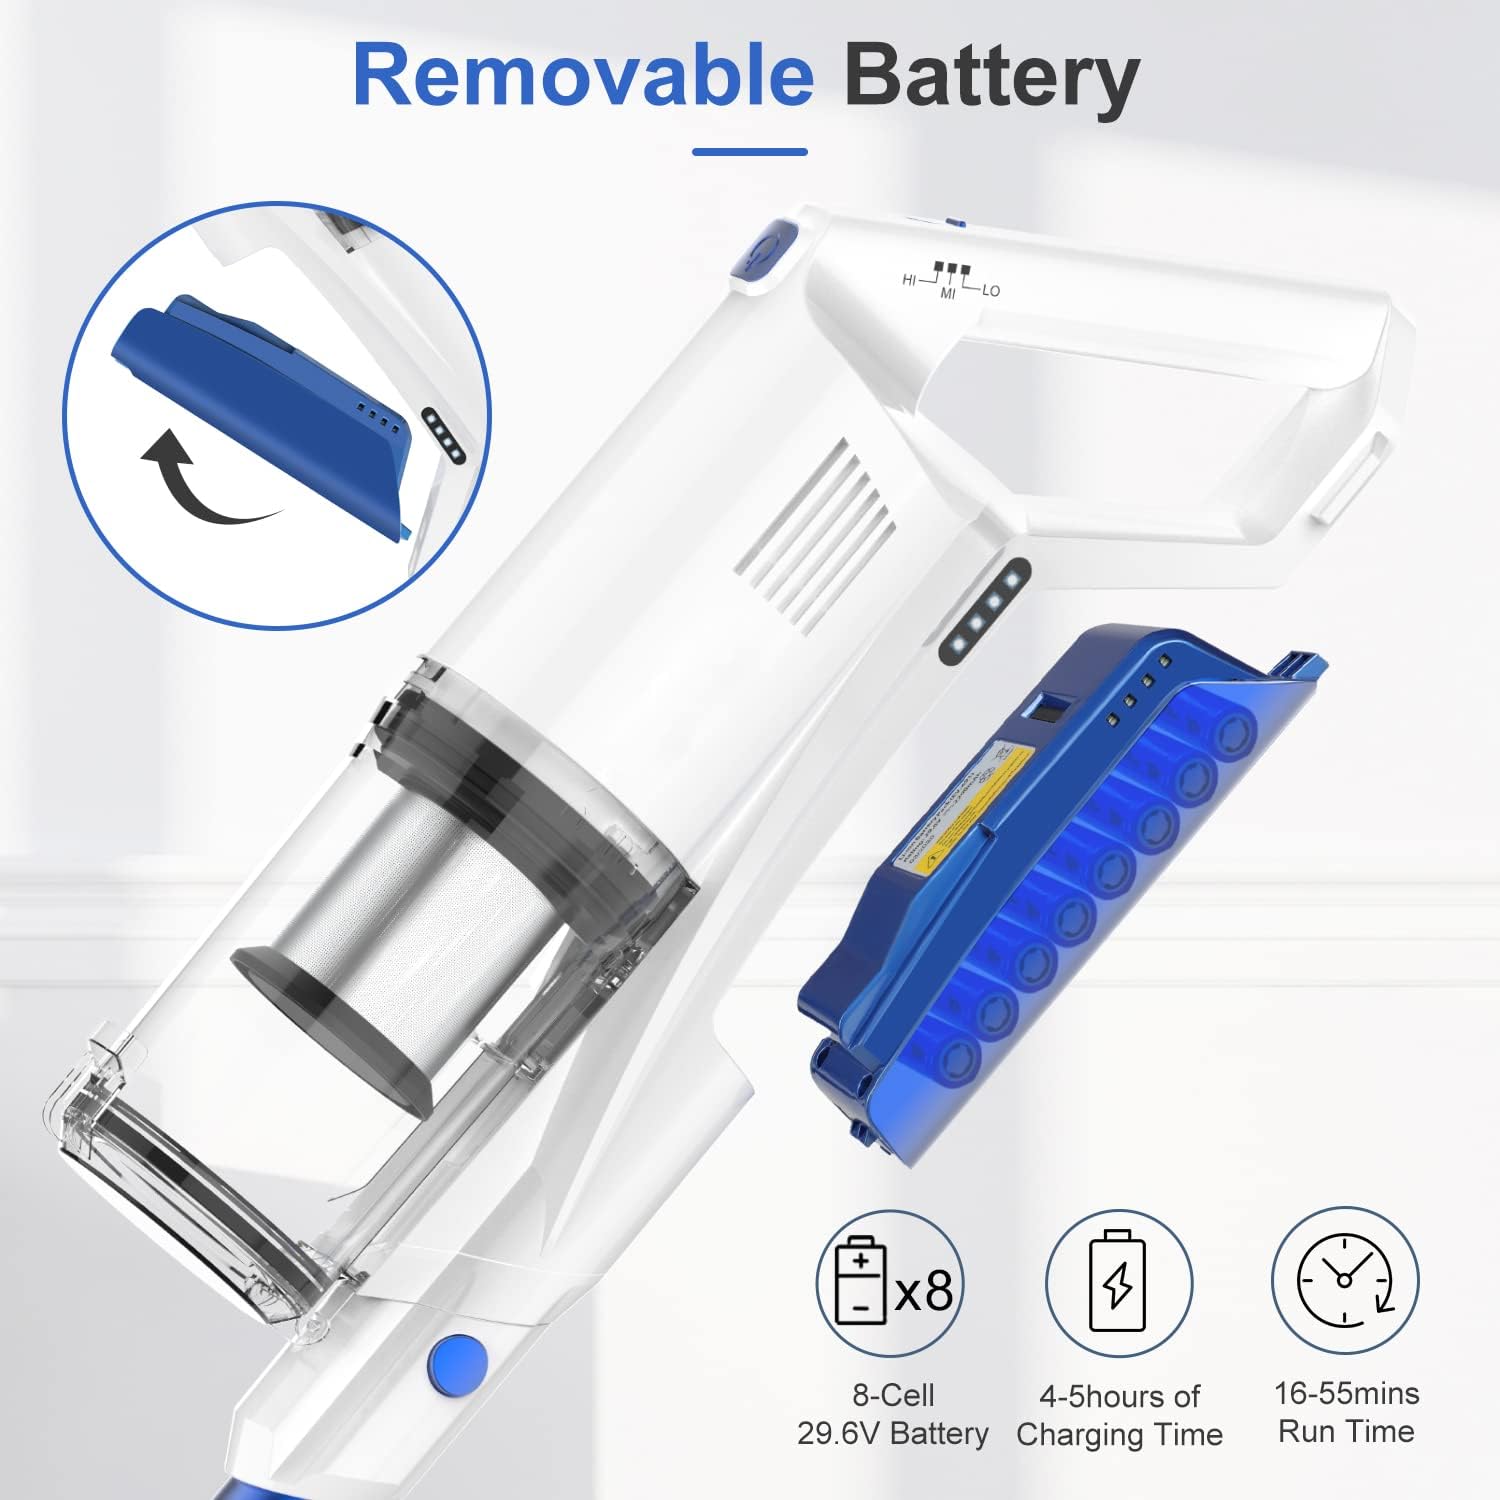 wurese Cordless Vacuum Cleaner, Upgraded 25Kpa Suction 280W Brushless Motor Cordless Stick Vacuum Cleaner, Lightweight Handheld Vacuum for Home Pet Hair Carpet Hard Floor, up to 55mins Runtime